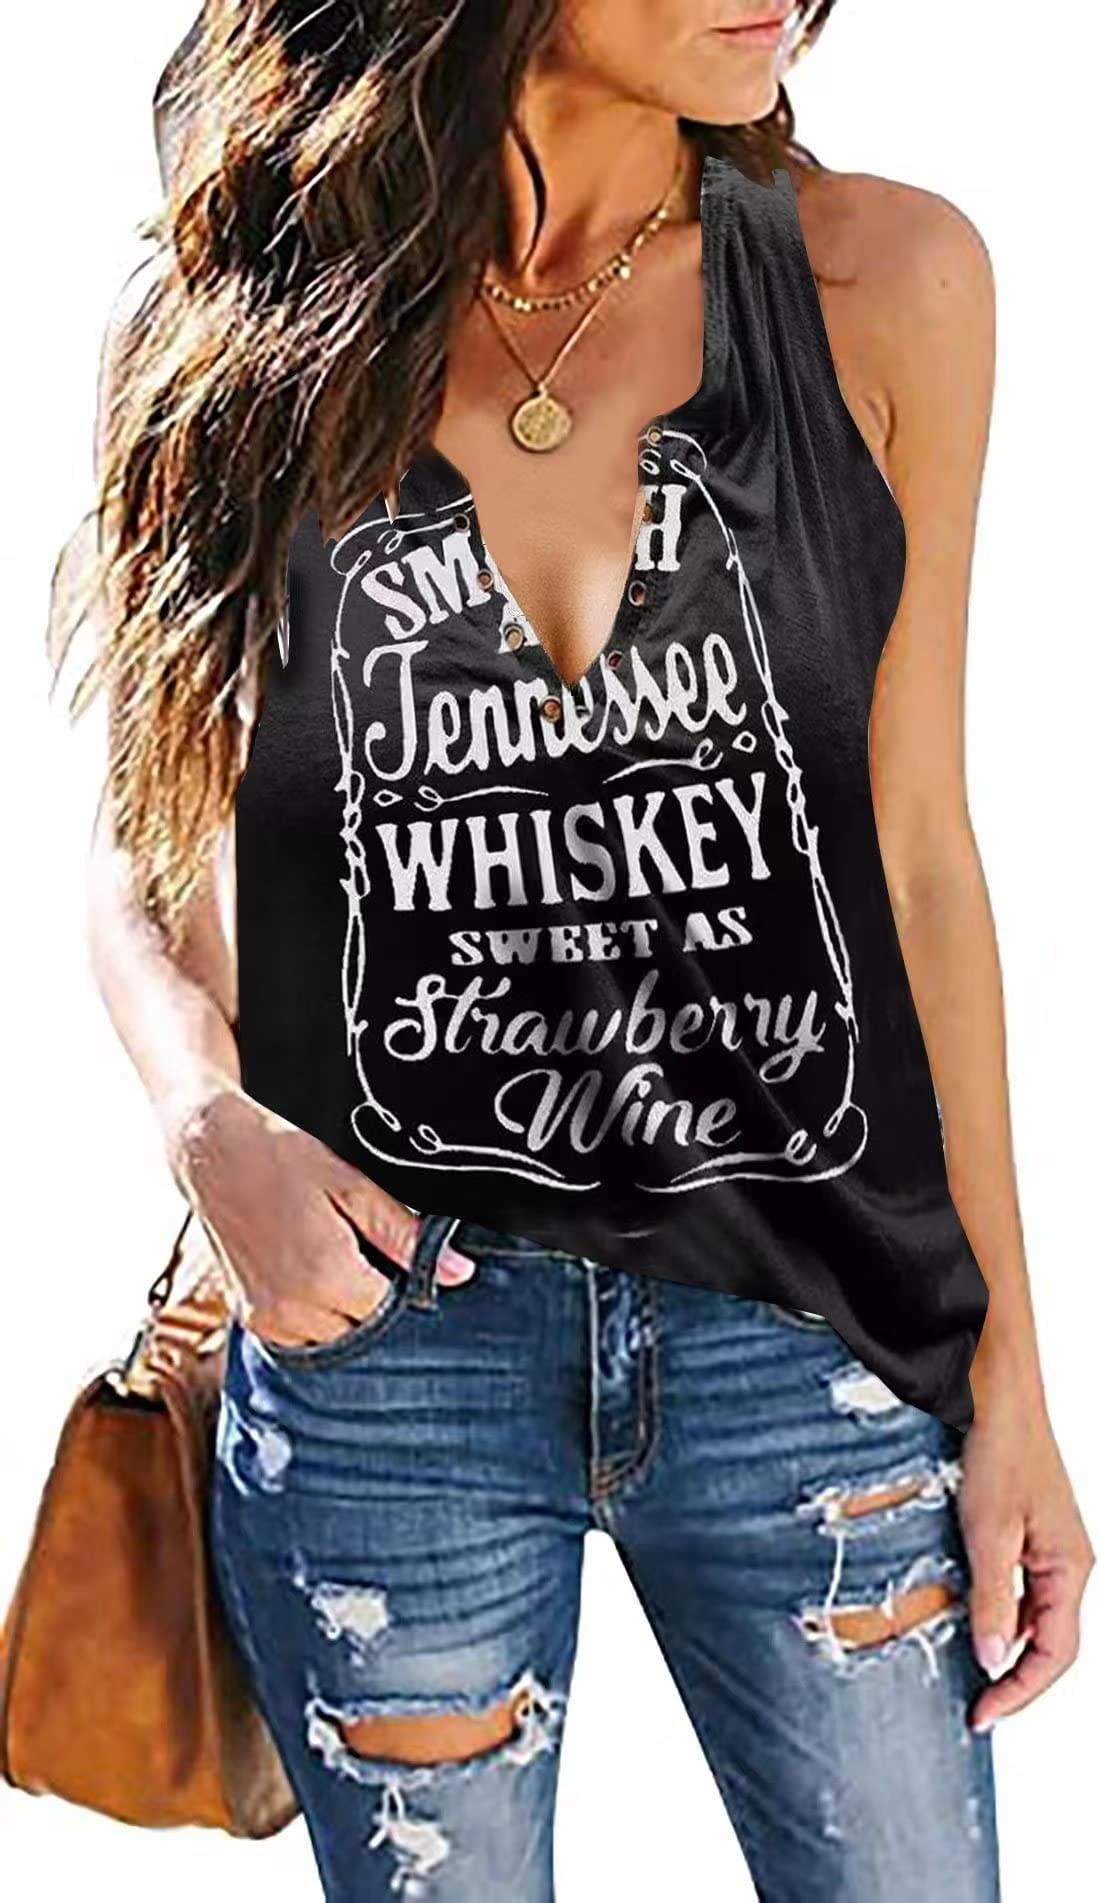 WSPLYSPJY Women Smooth As Tennessee Whiskey Sweet As Strawberry Wine ...